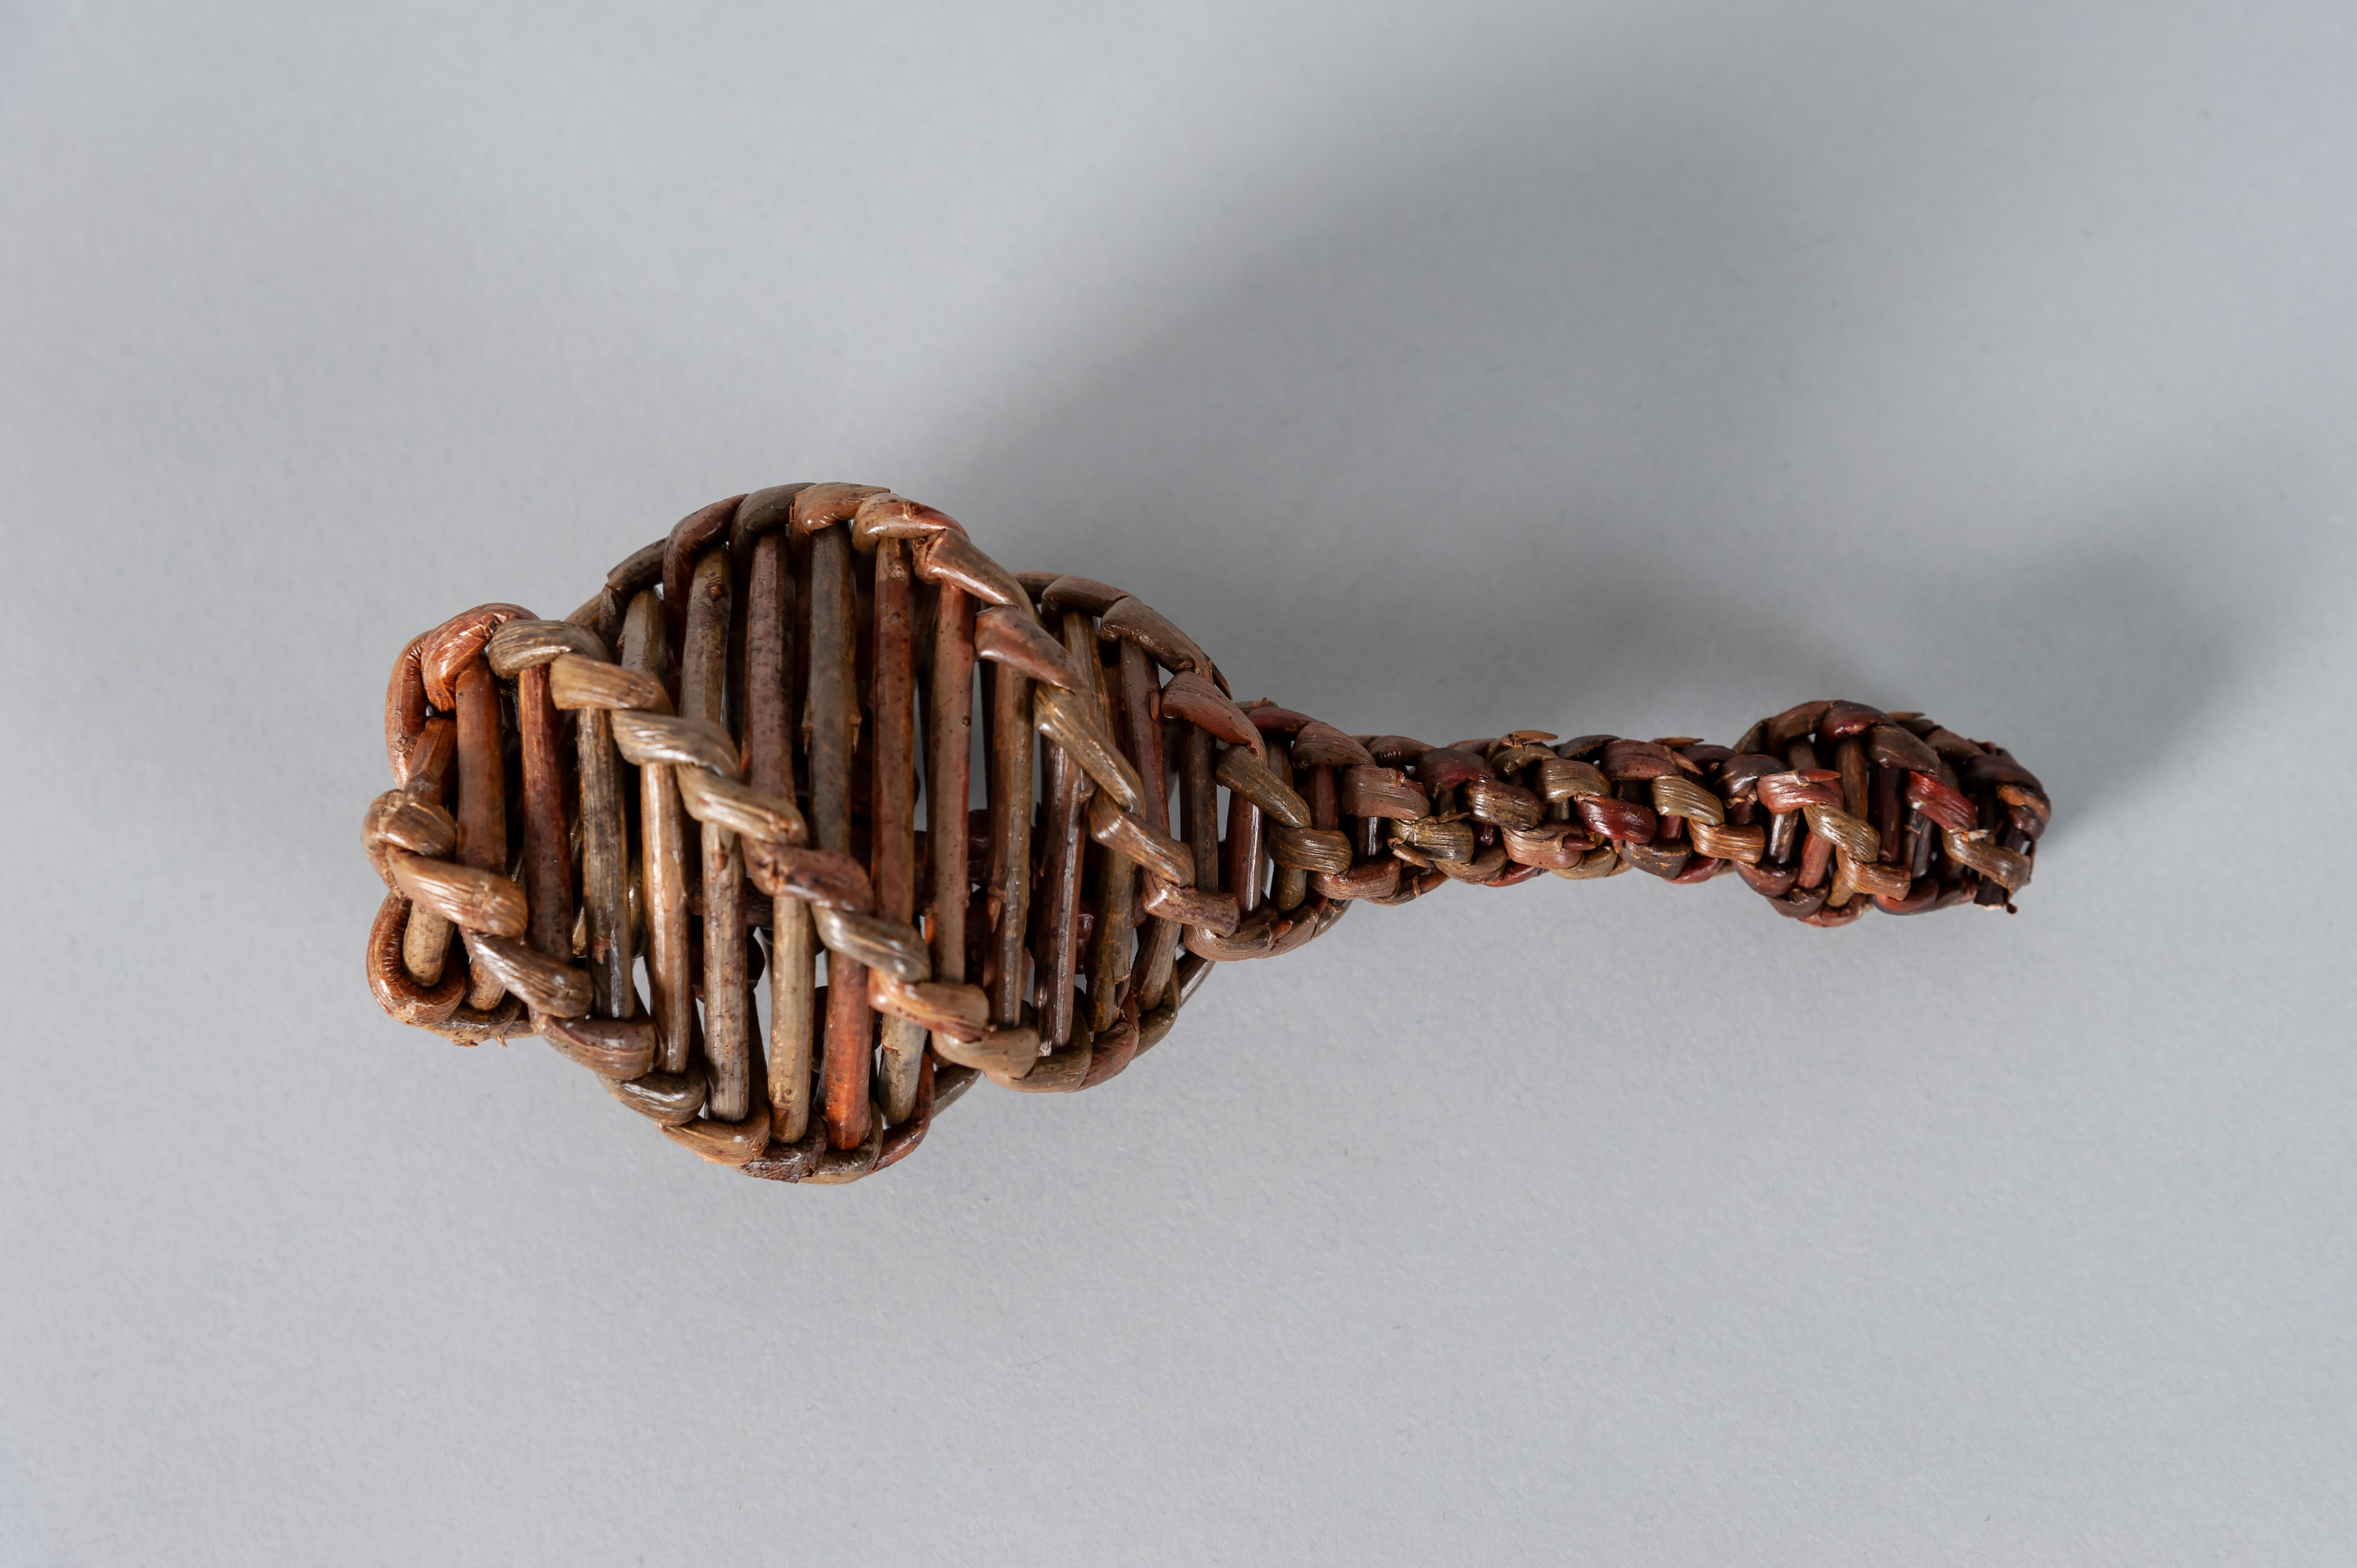 Organically Grown Woven Willow Rattle